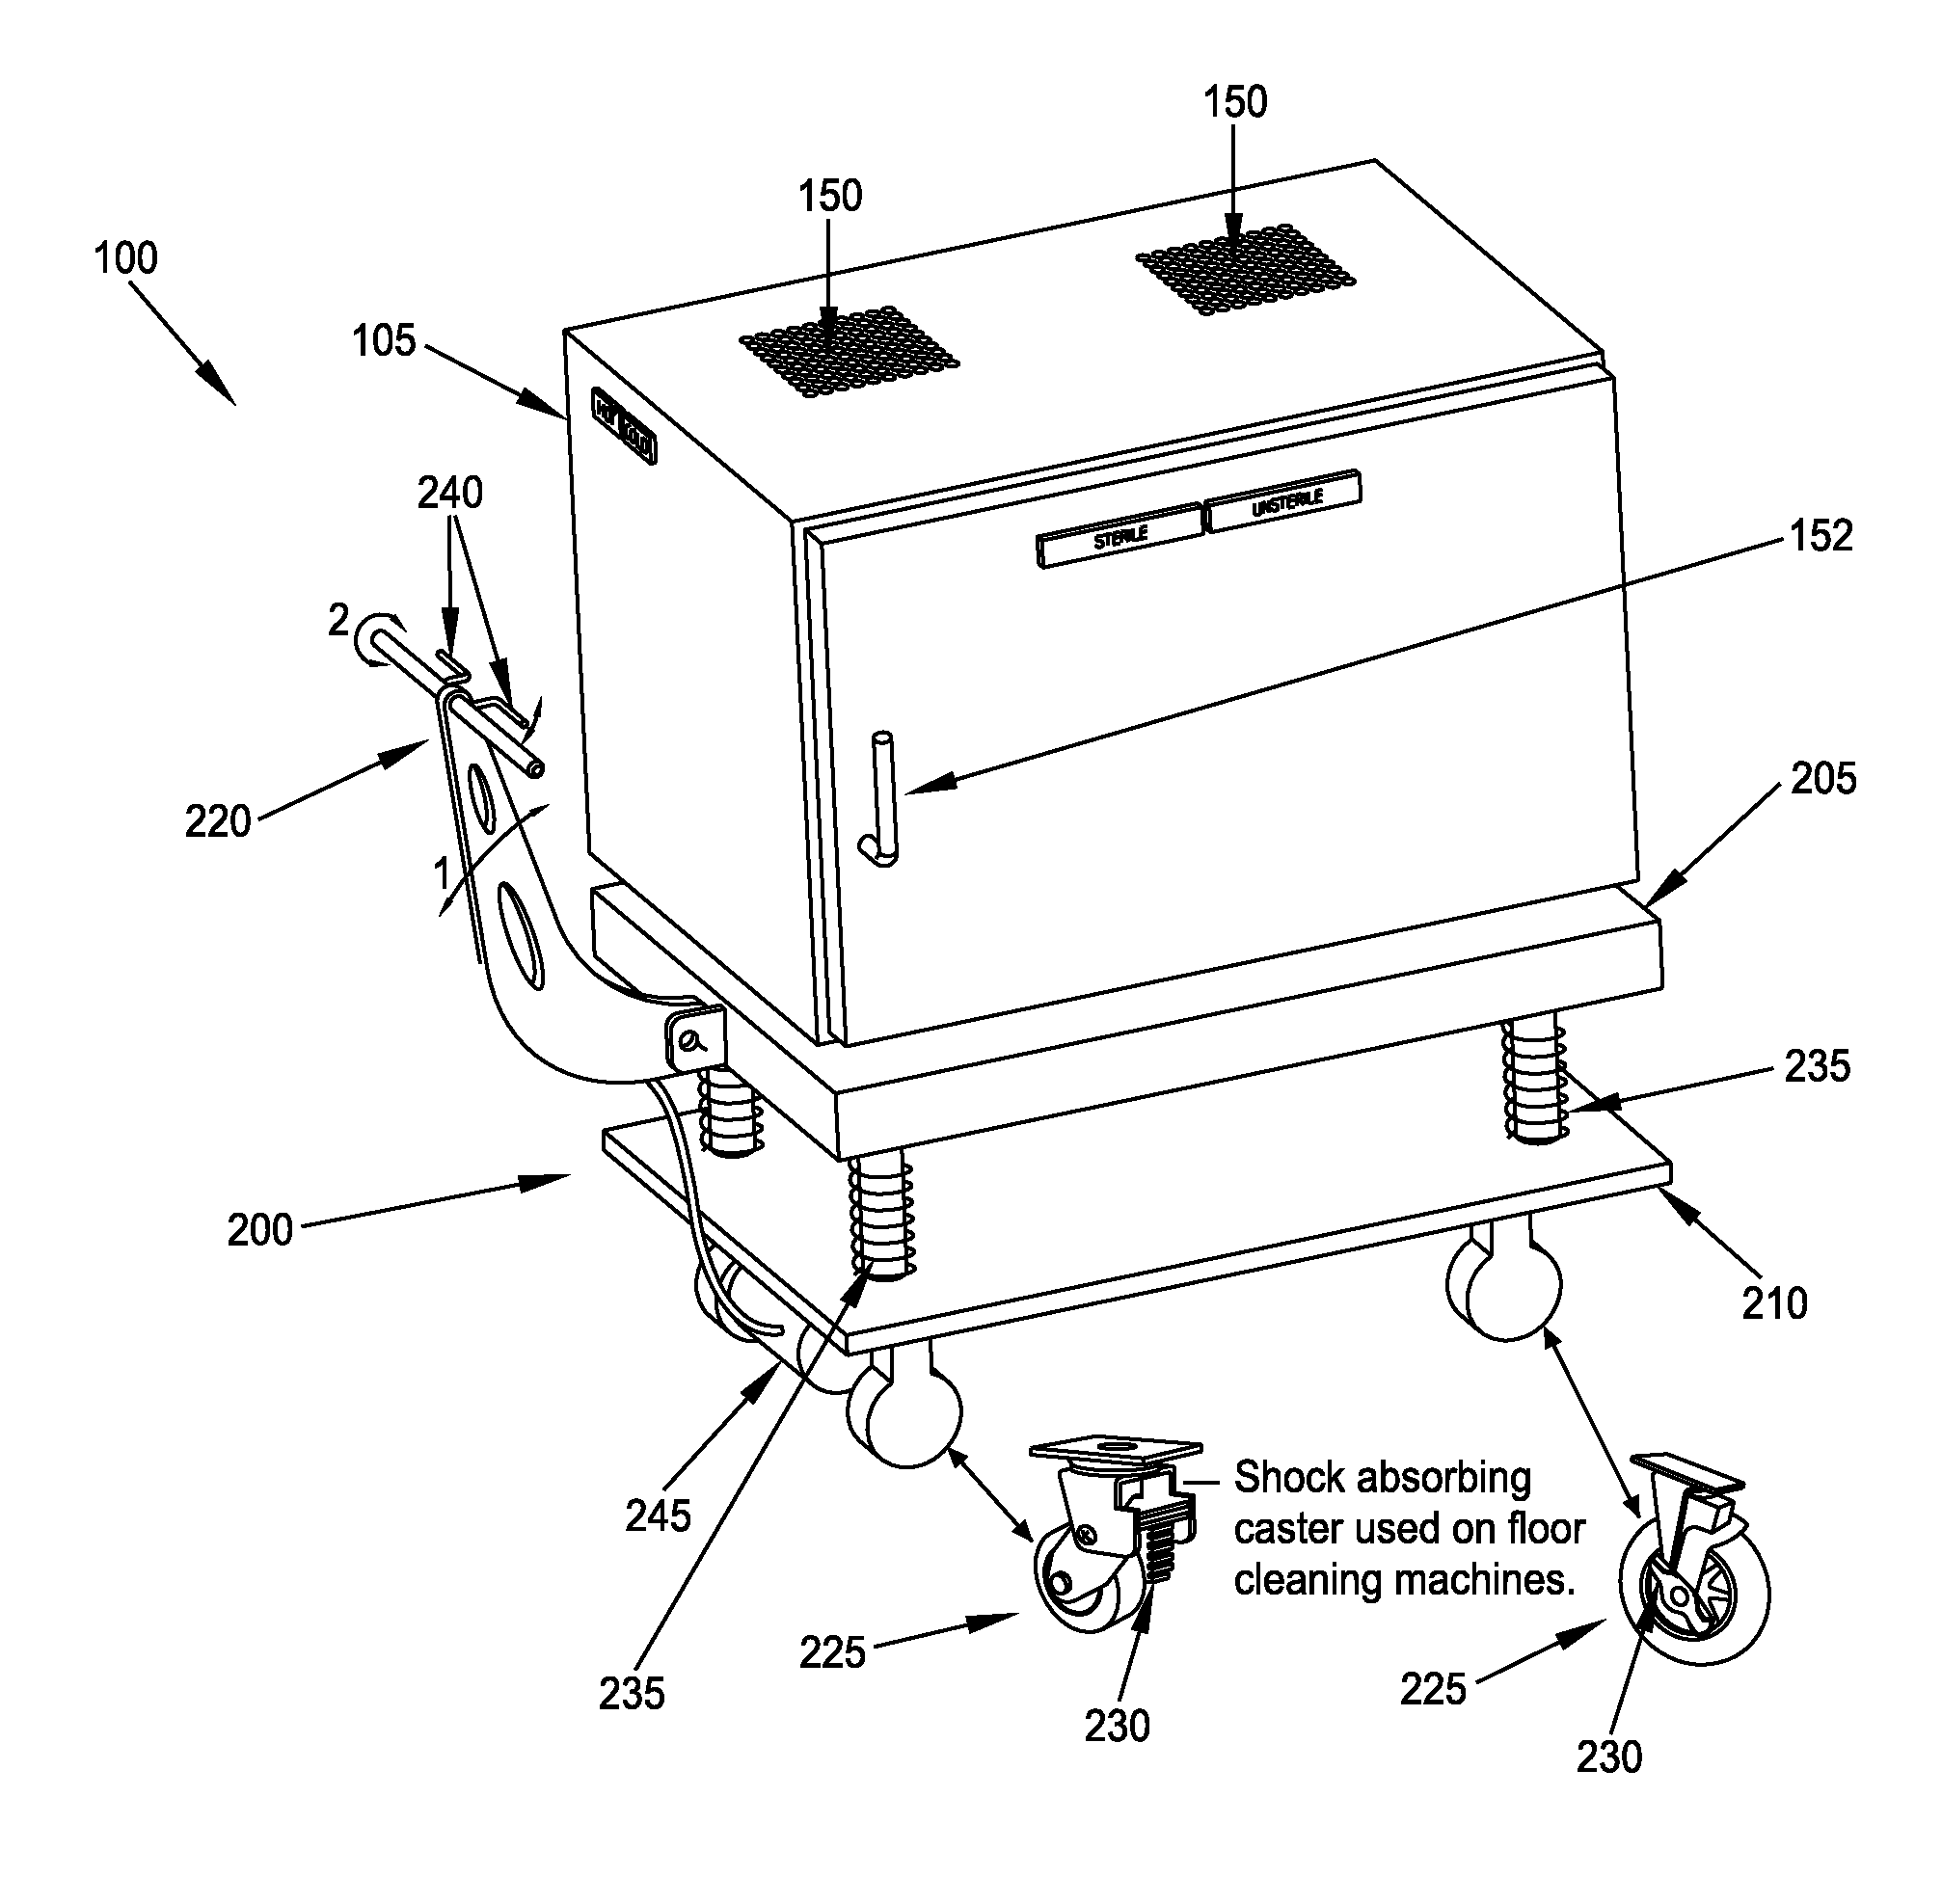 Mobile sterilization apparatus and method for using the same